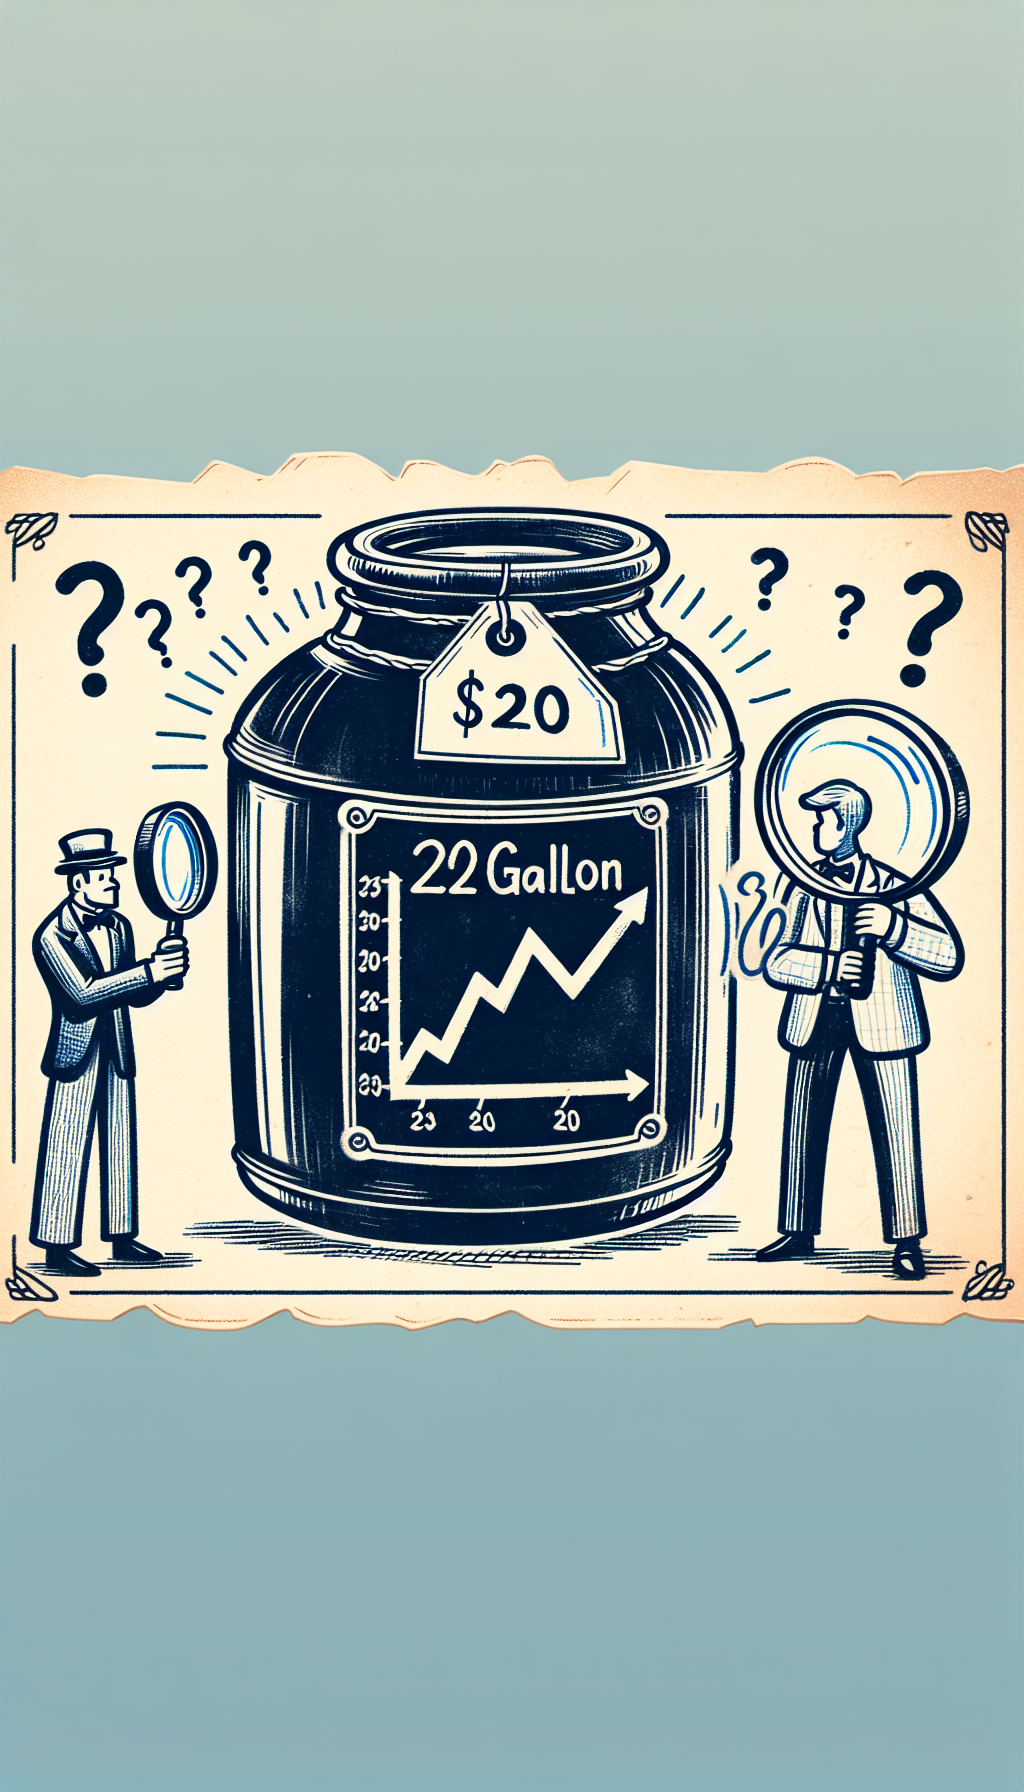 A whimsical line-drawn illustration features a large, detailed 20-gallon antique crock with a glowing aura signifying rarity. A magnifying glass held by an unseen figure focuses on the crock's maker's mark, revealing its distinguished provenance. A price tag dangles with an upward trending graph and question marks, embodying the crock's fluid market value.